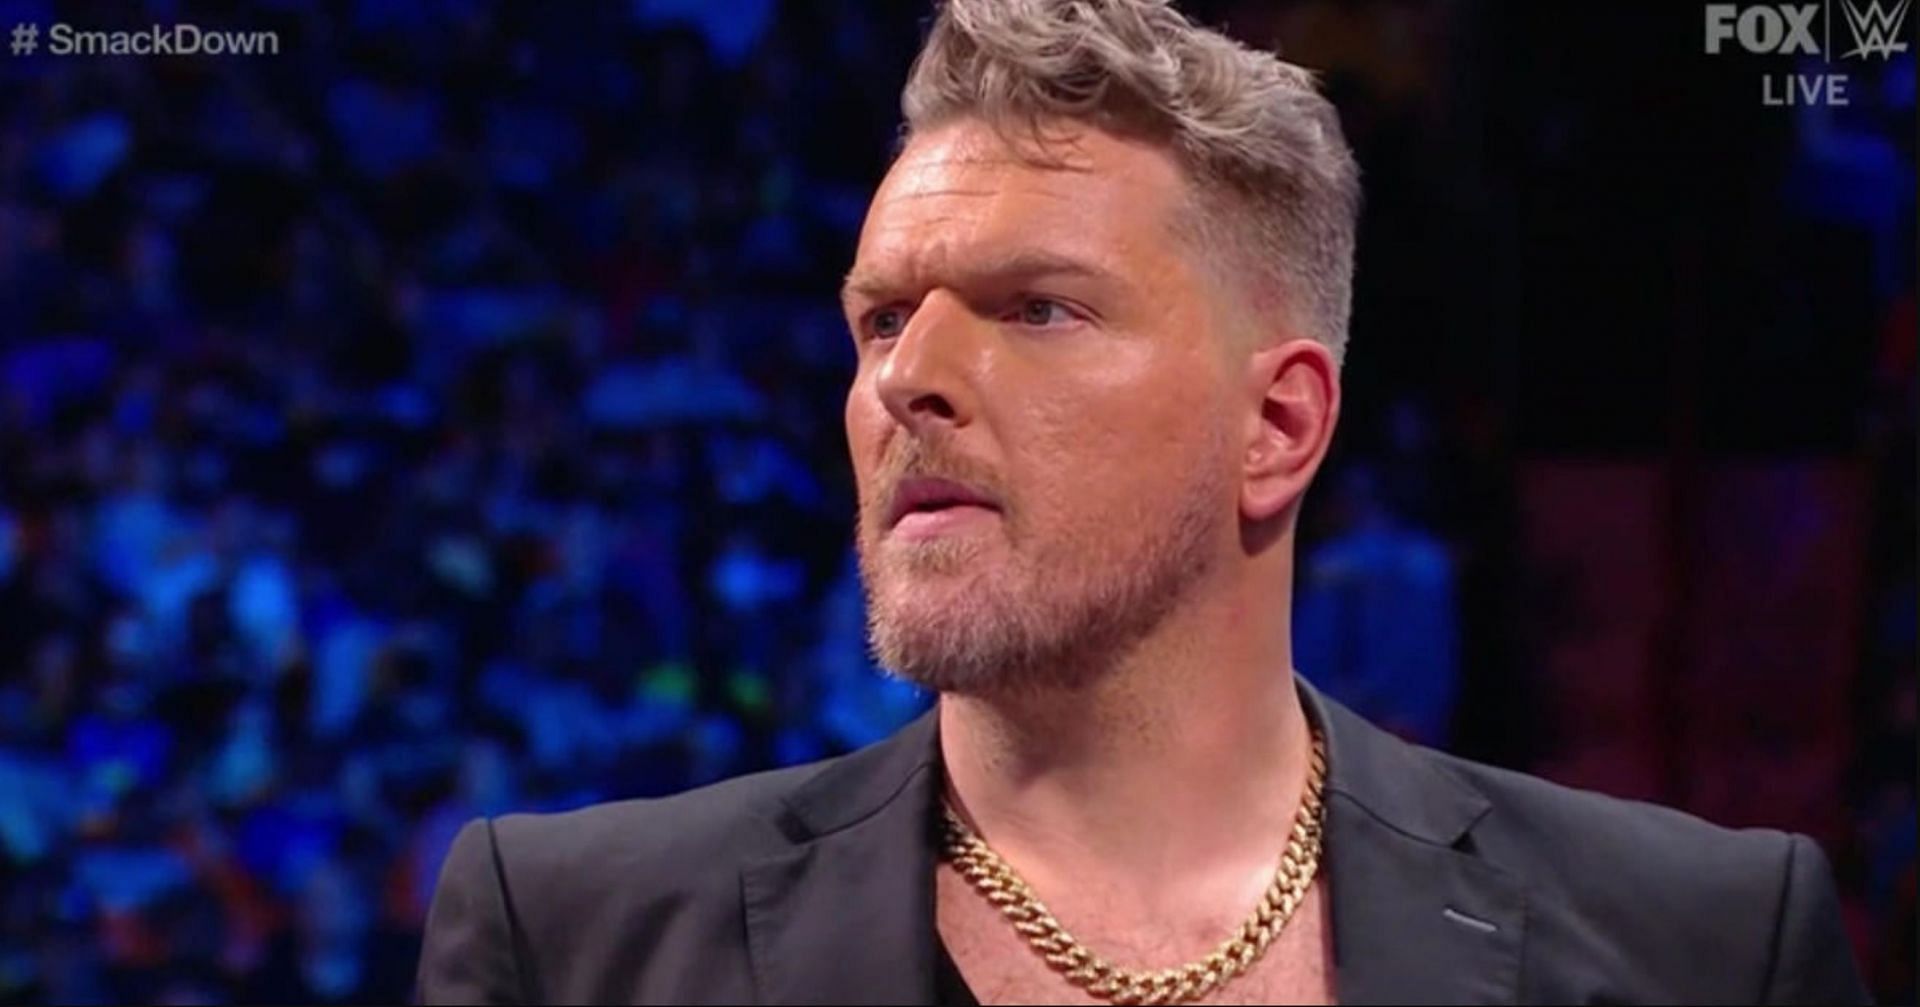 Pat McAfee is part of the SmackDown announcement team with Michael Cole